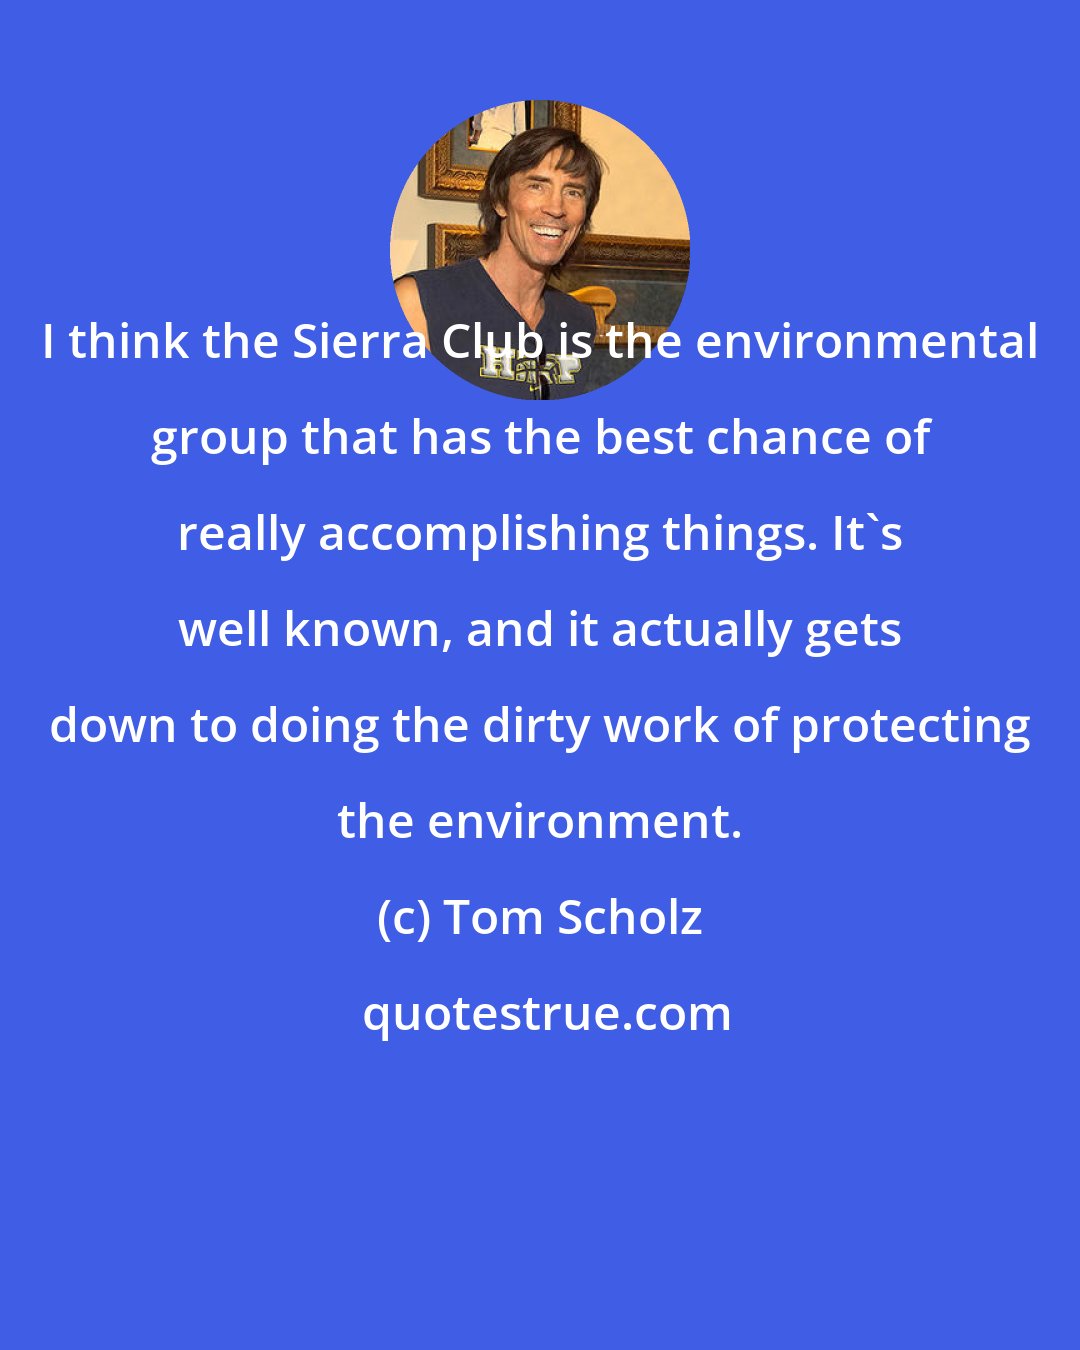 Tom Scholz: I think the Sierra Club is the environmental group that has the best chance of really accomplishing things. It's well known, and it actually gets down to doing the dirty work of protecting the environment.